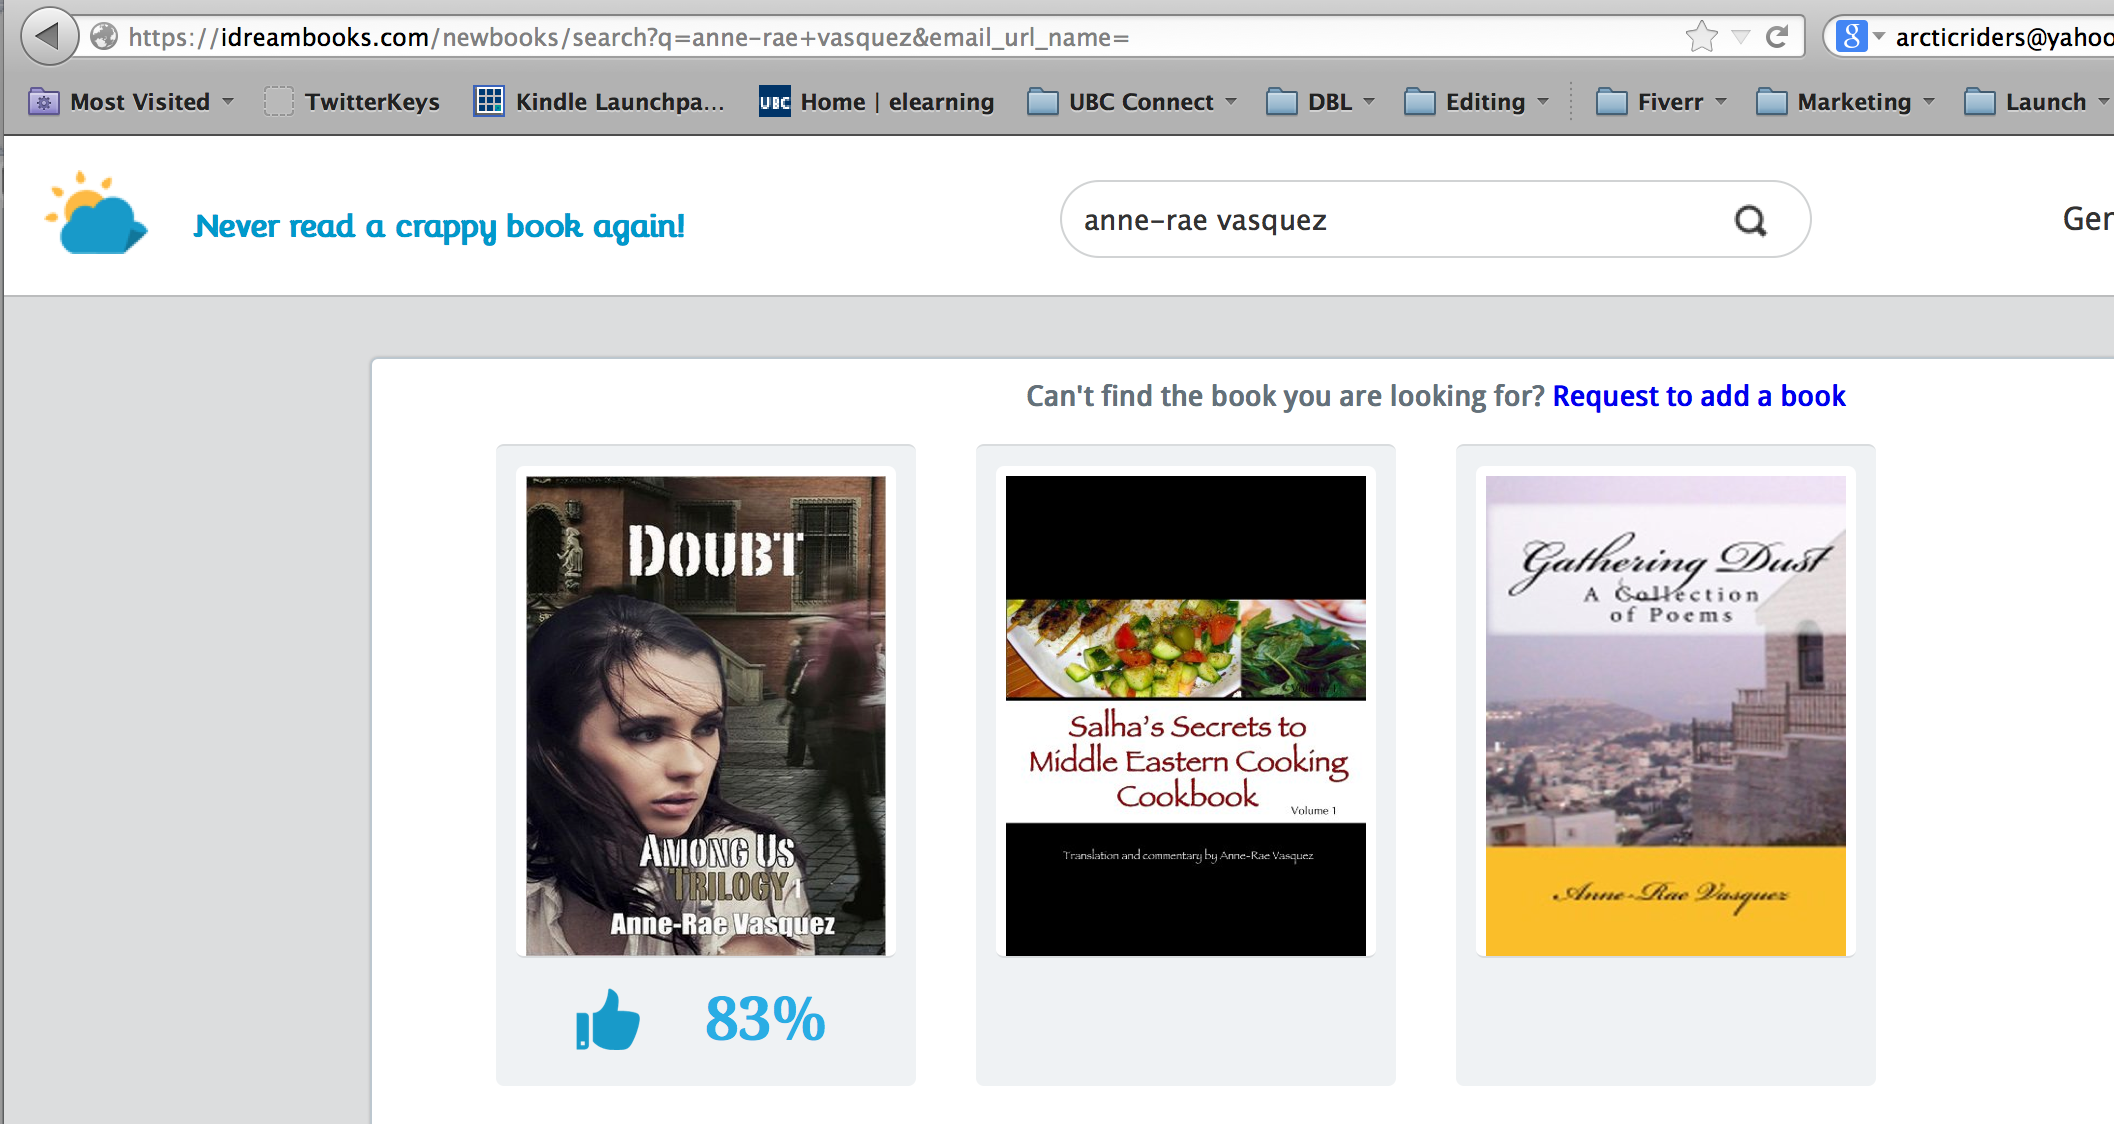 Doubt featured on iDreamBooks